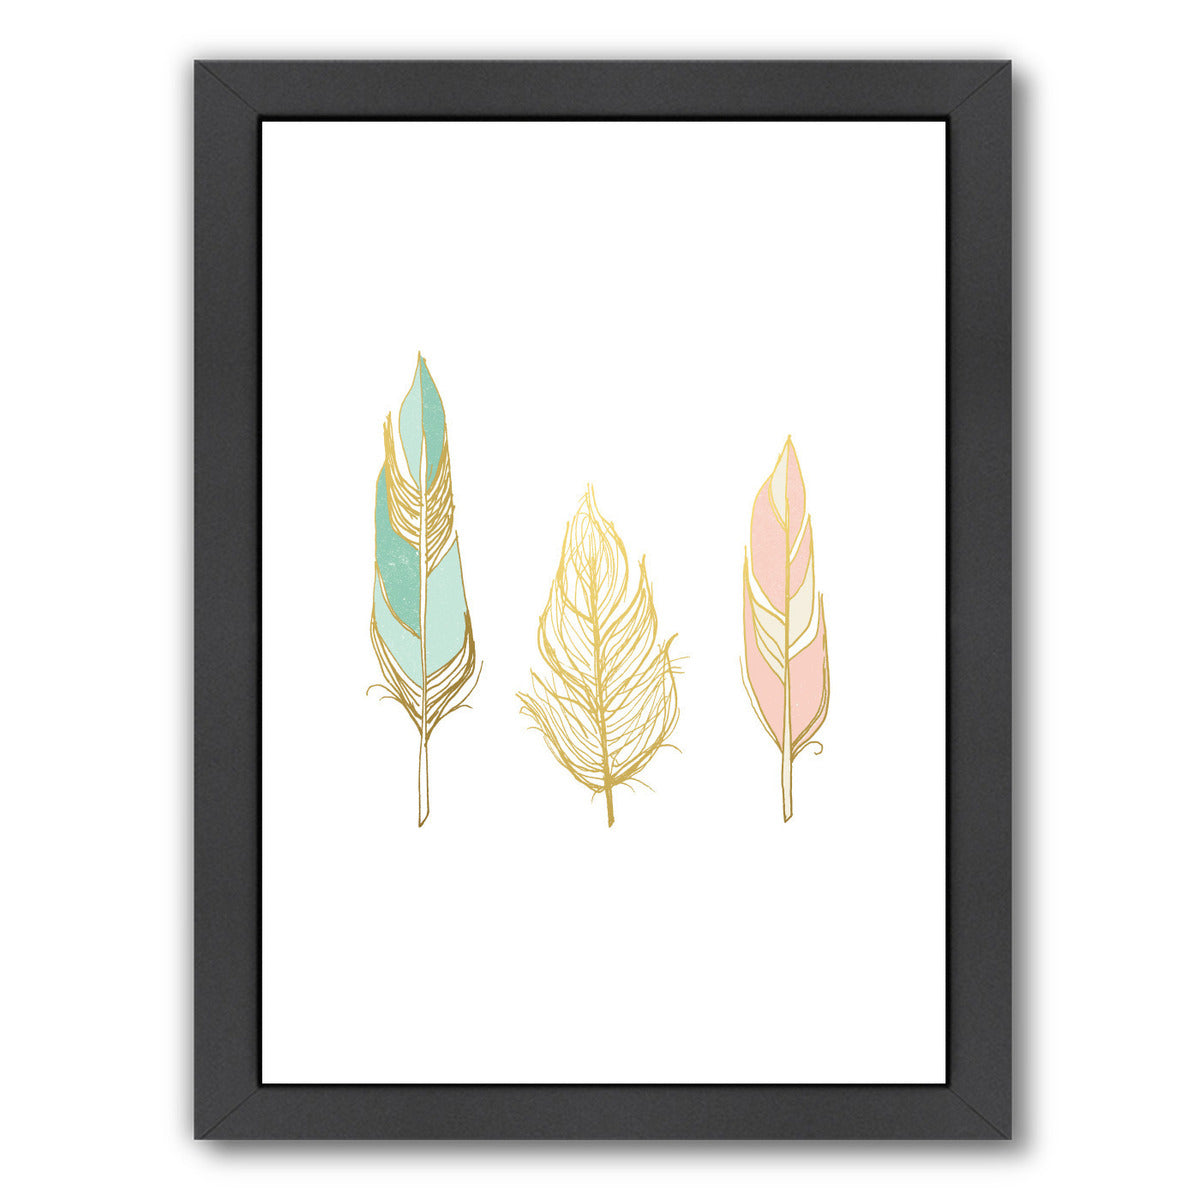 Three Feathers In Gold By Wall + Wonder - Black Framed Print - Wall Art - Americanflat